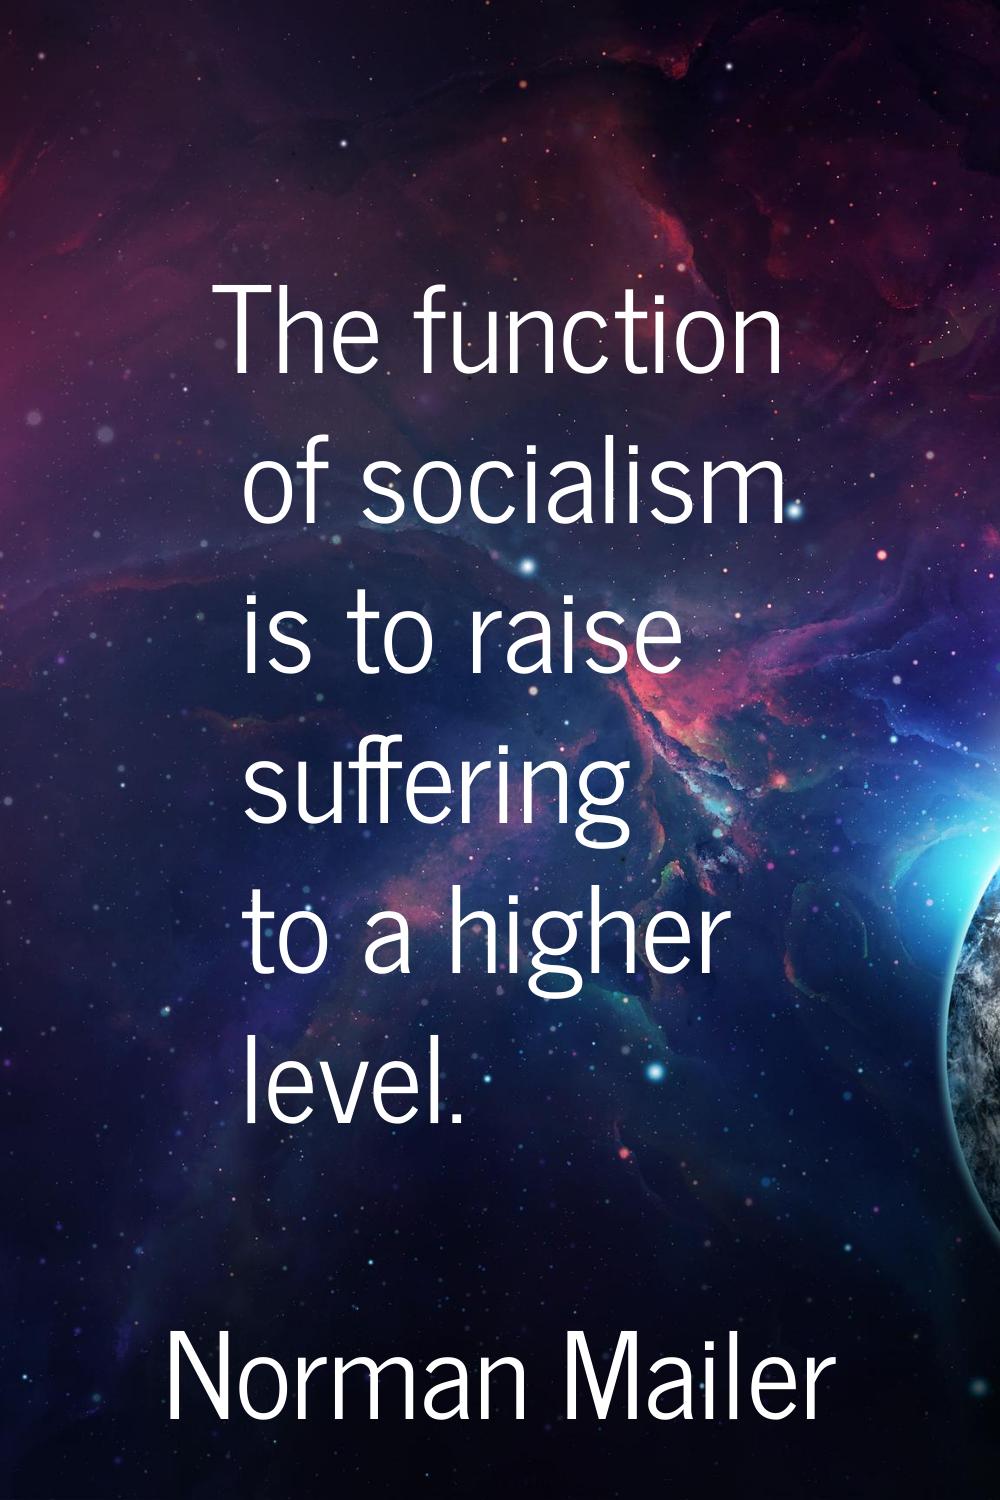 The function of socialism is to raise suffering to a higher level.